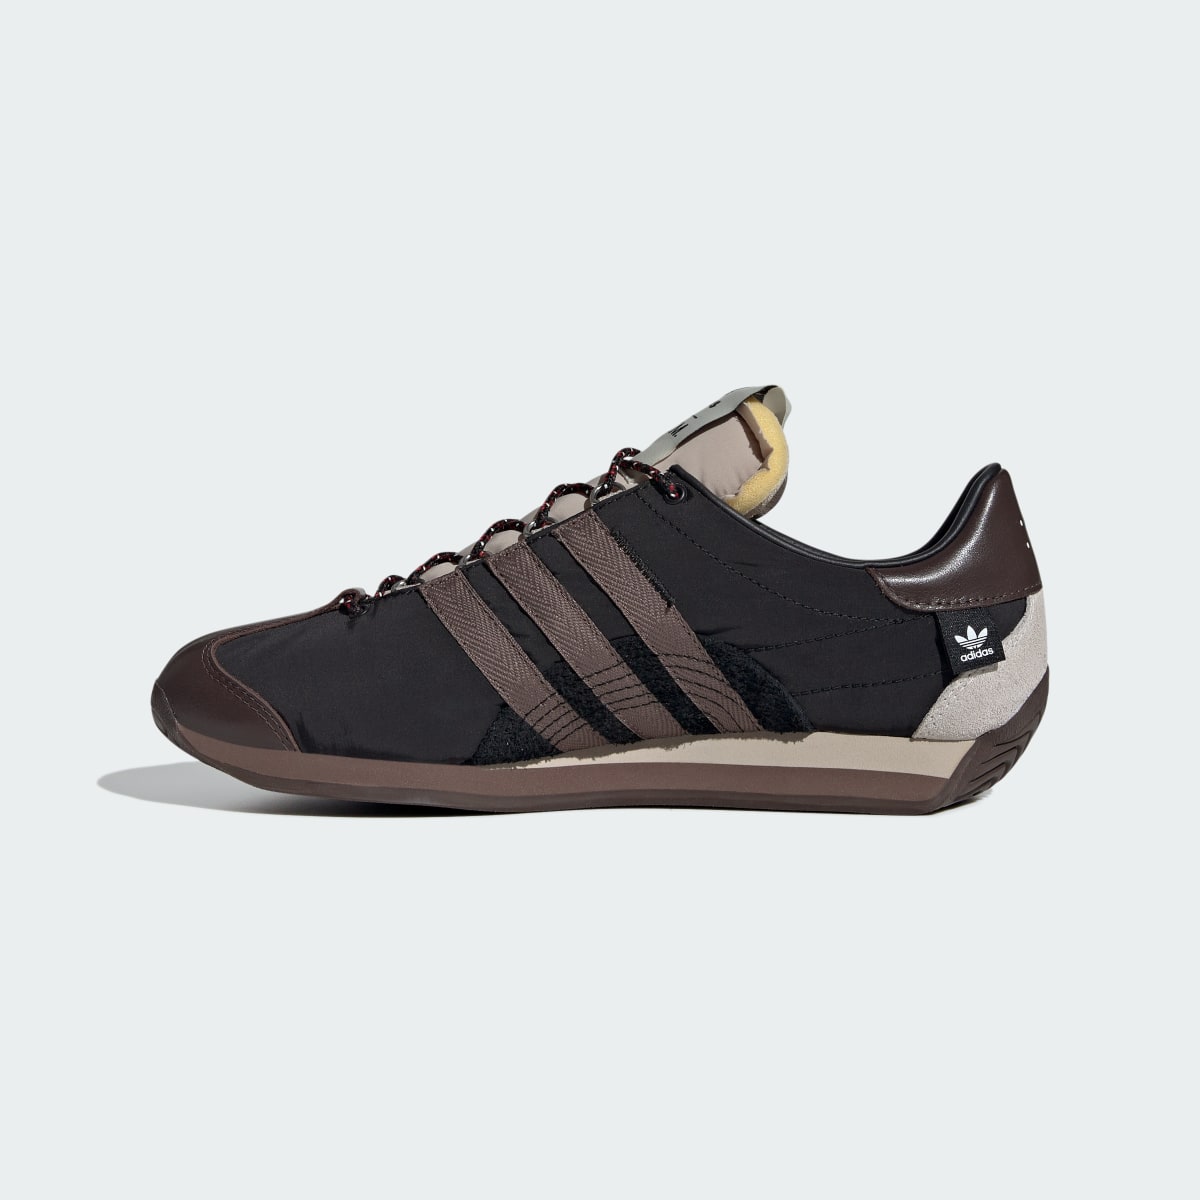 Adidas Country OG Low Trainers. 8